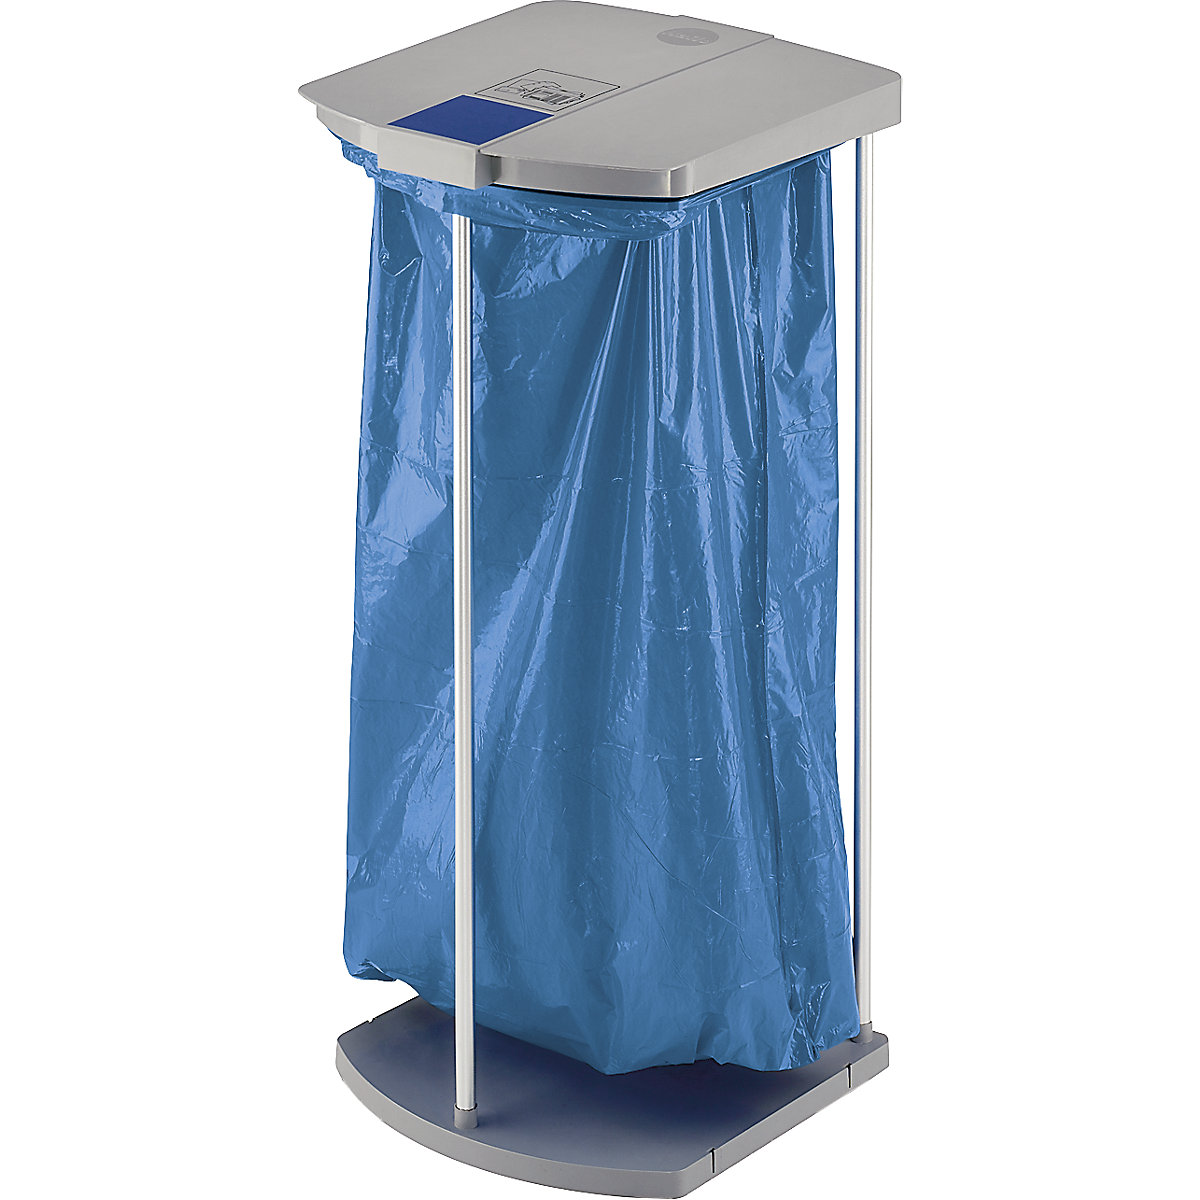 Waste sack stand with 250 blue recycling sacks – Hailo